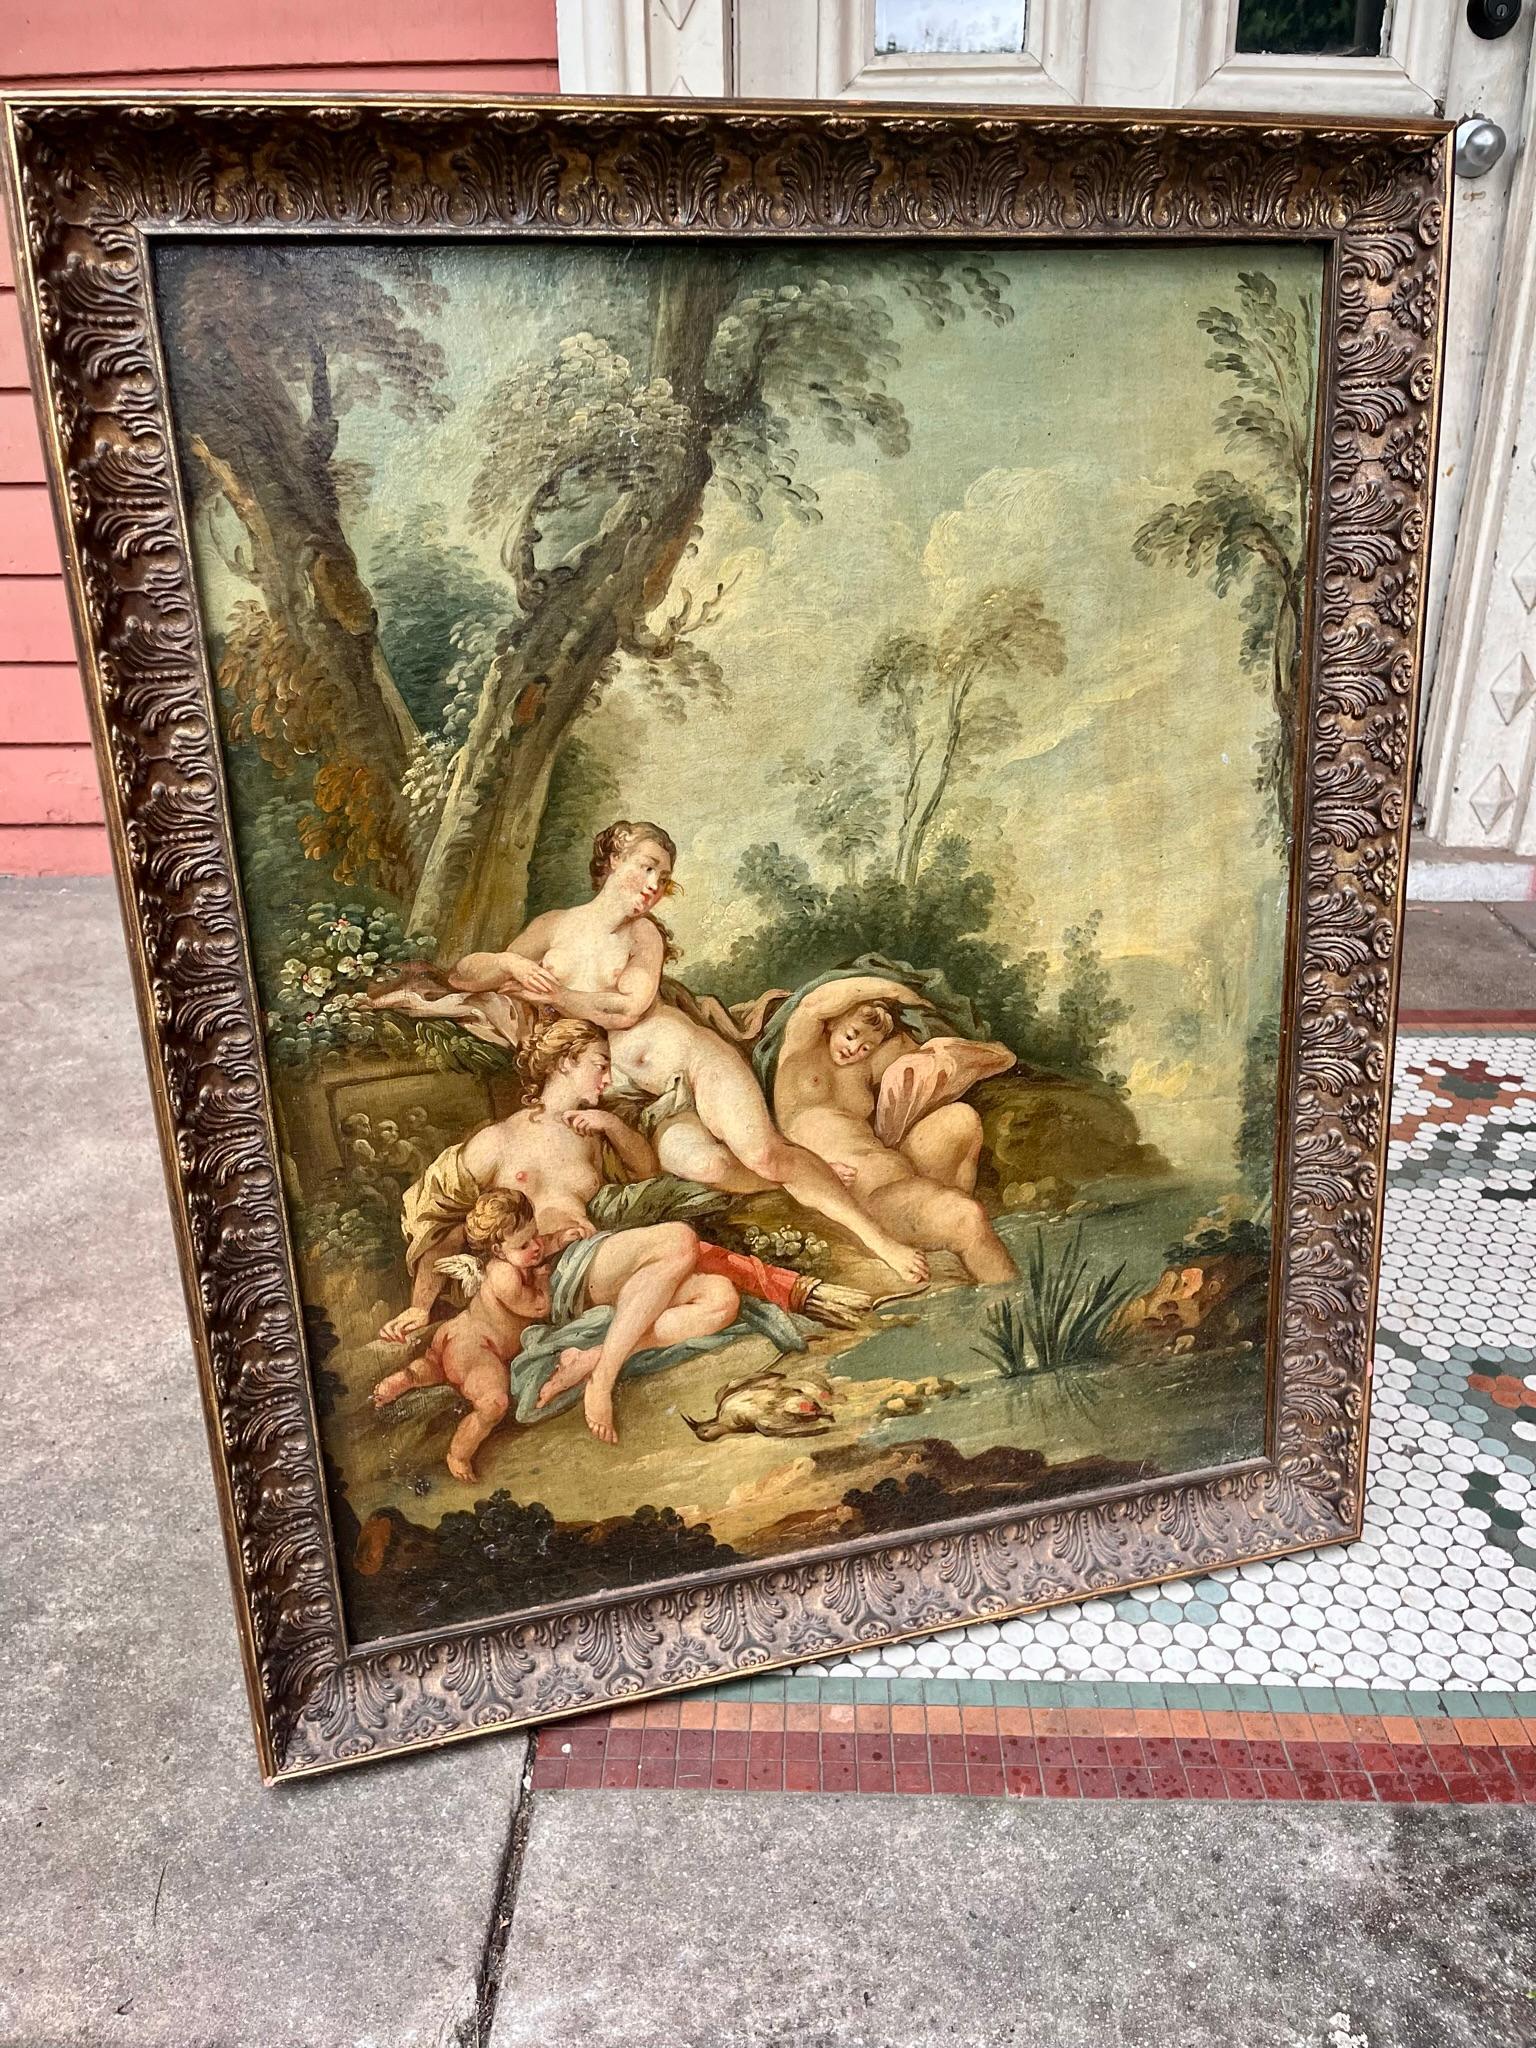 After Boucher.  
In overall very good shape. Minor scattered losses. Later frame but well carved and with an antique gilt finish. Good colors and detail

More than any other artist, François Boucher (1703–1770) is associated with the formulation of